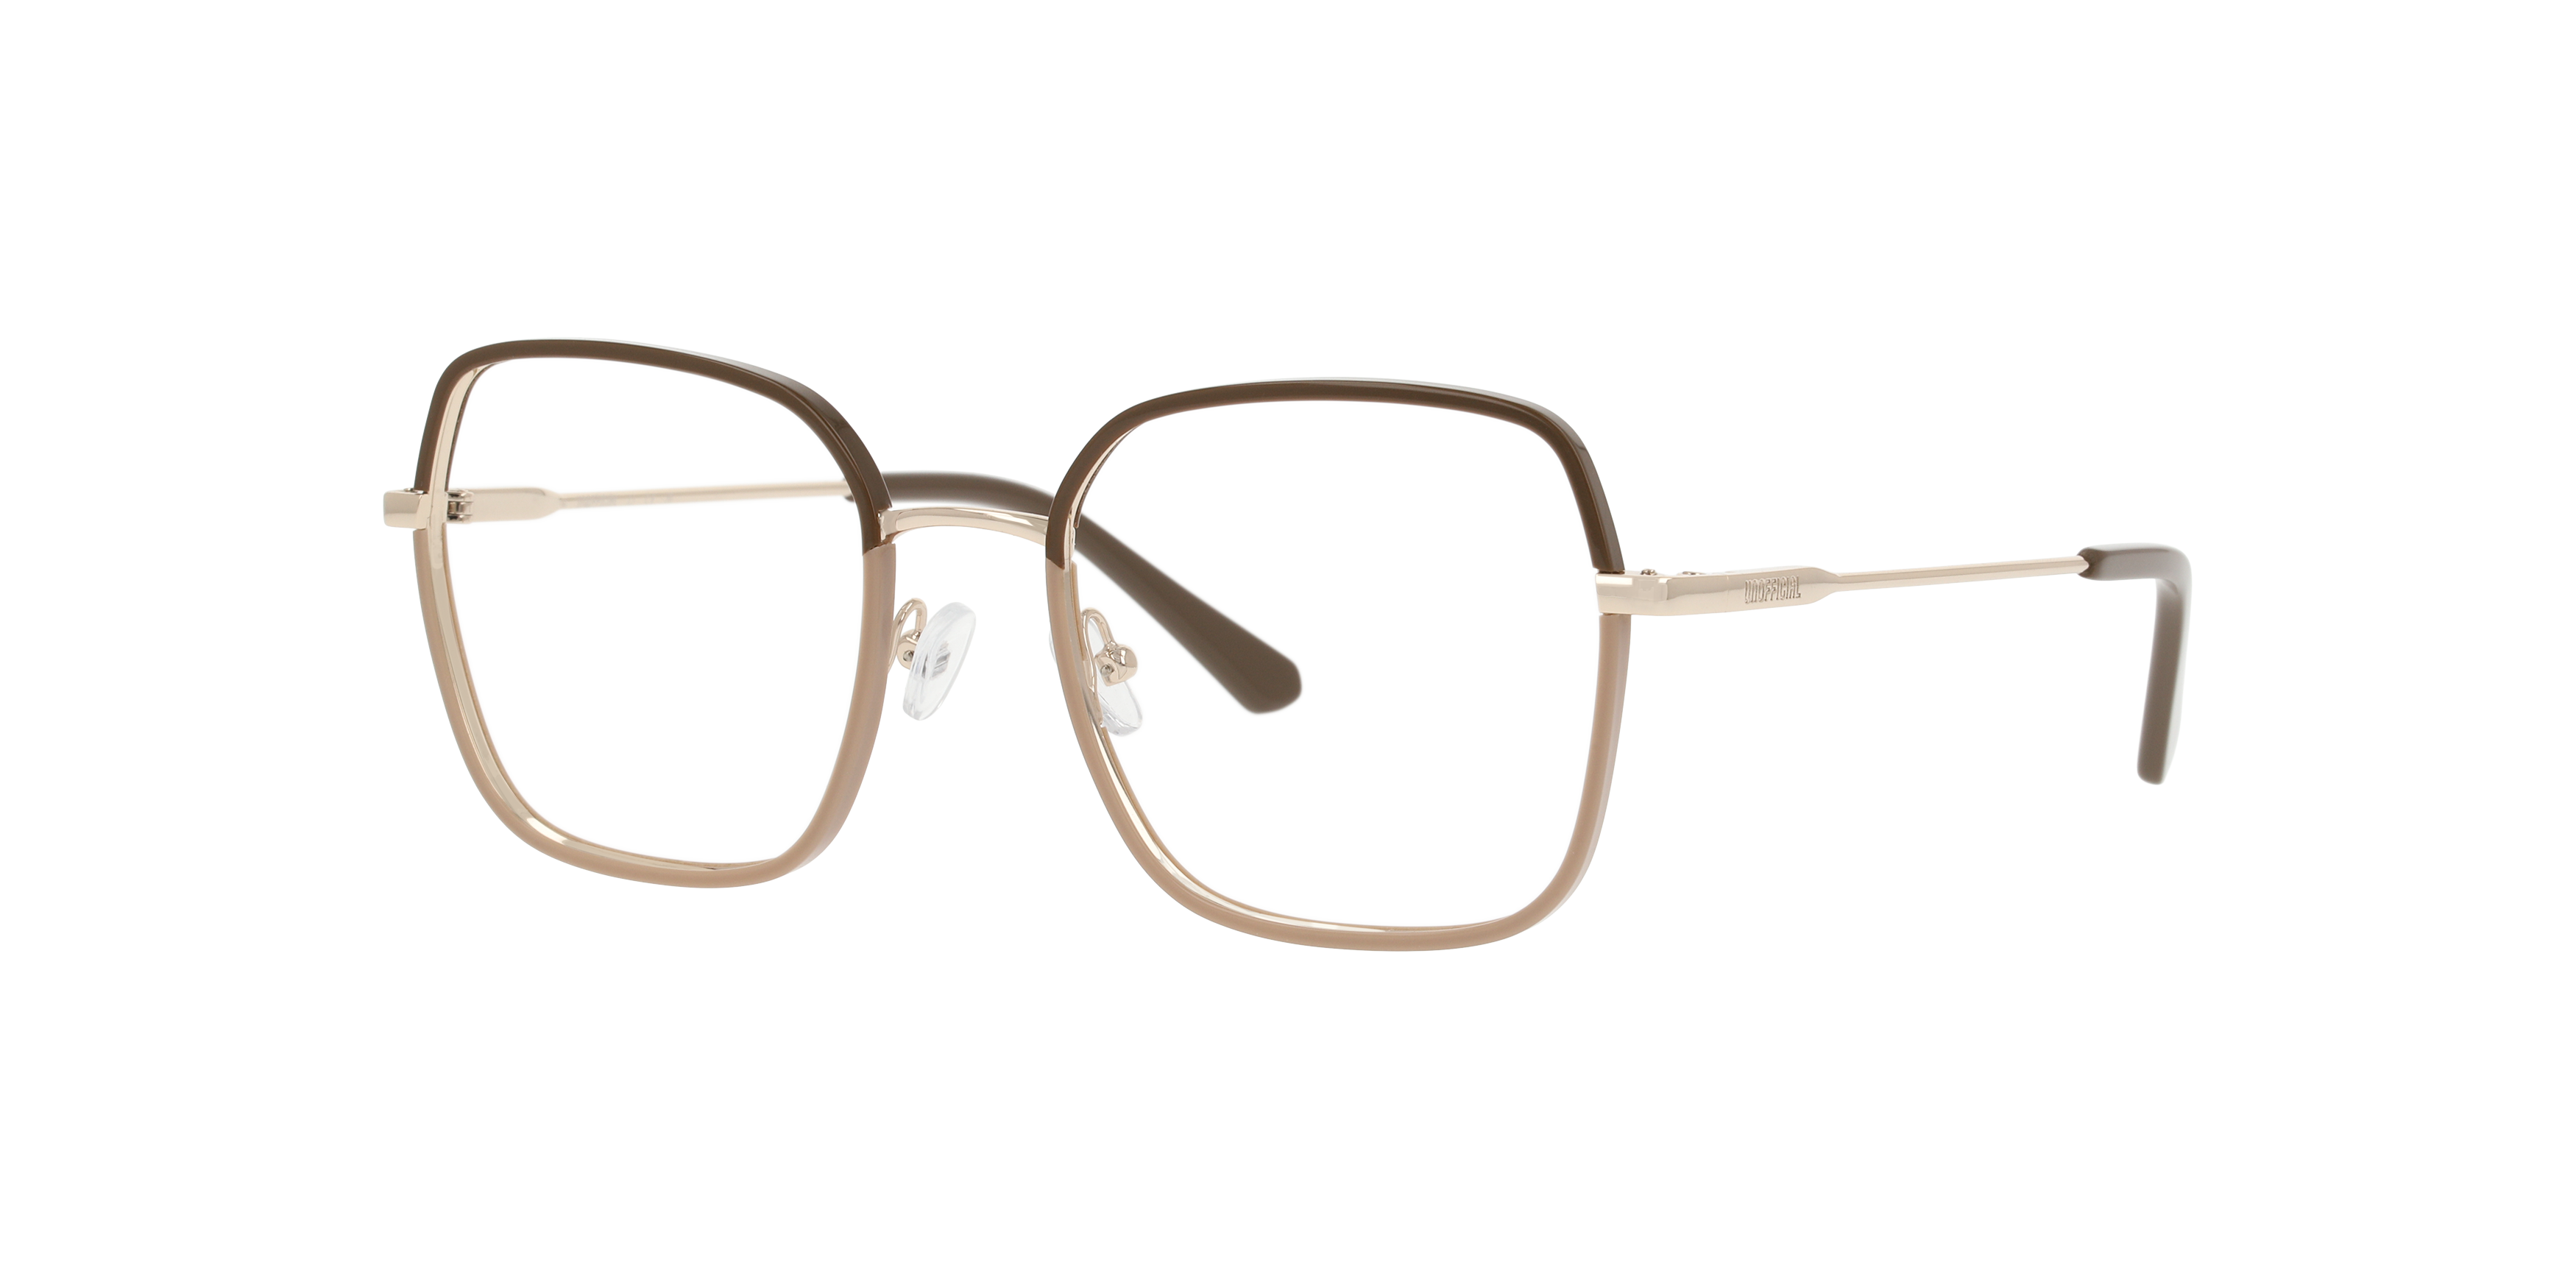 Angle_Left01 Unofficial UO1169 Glasses Transparent / Gold